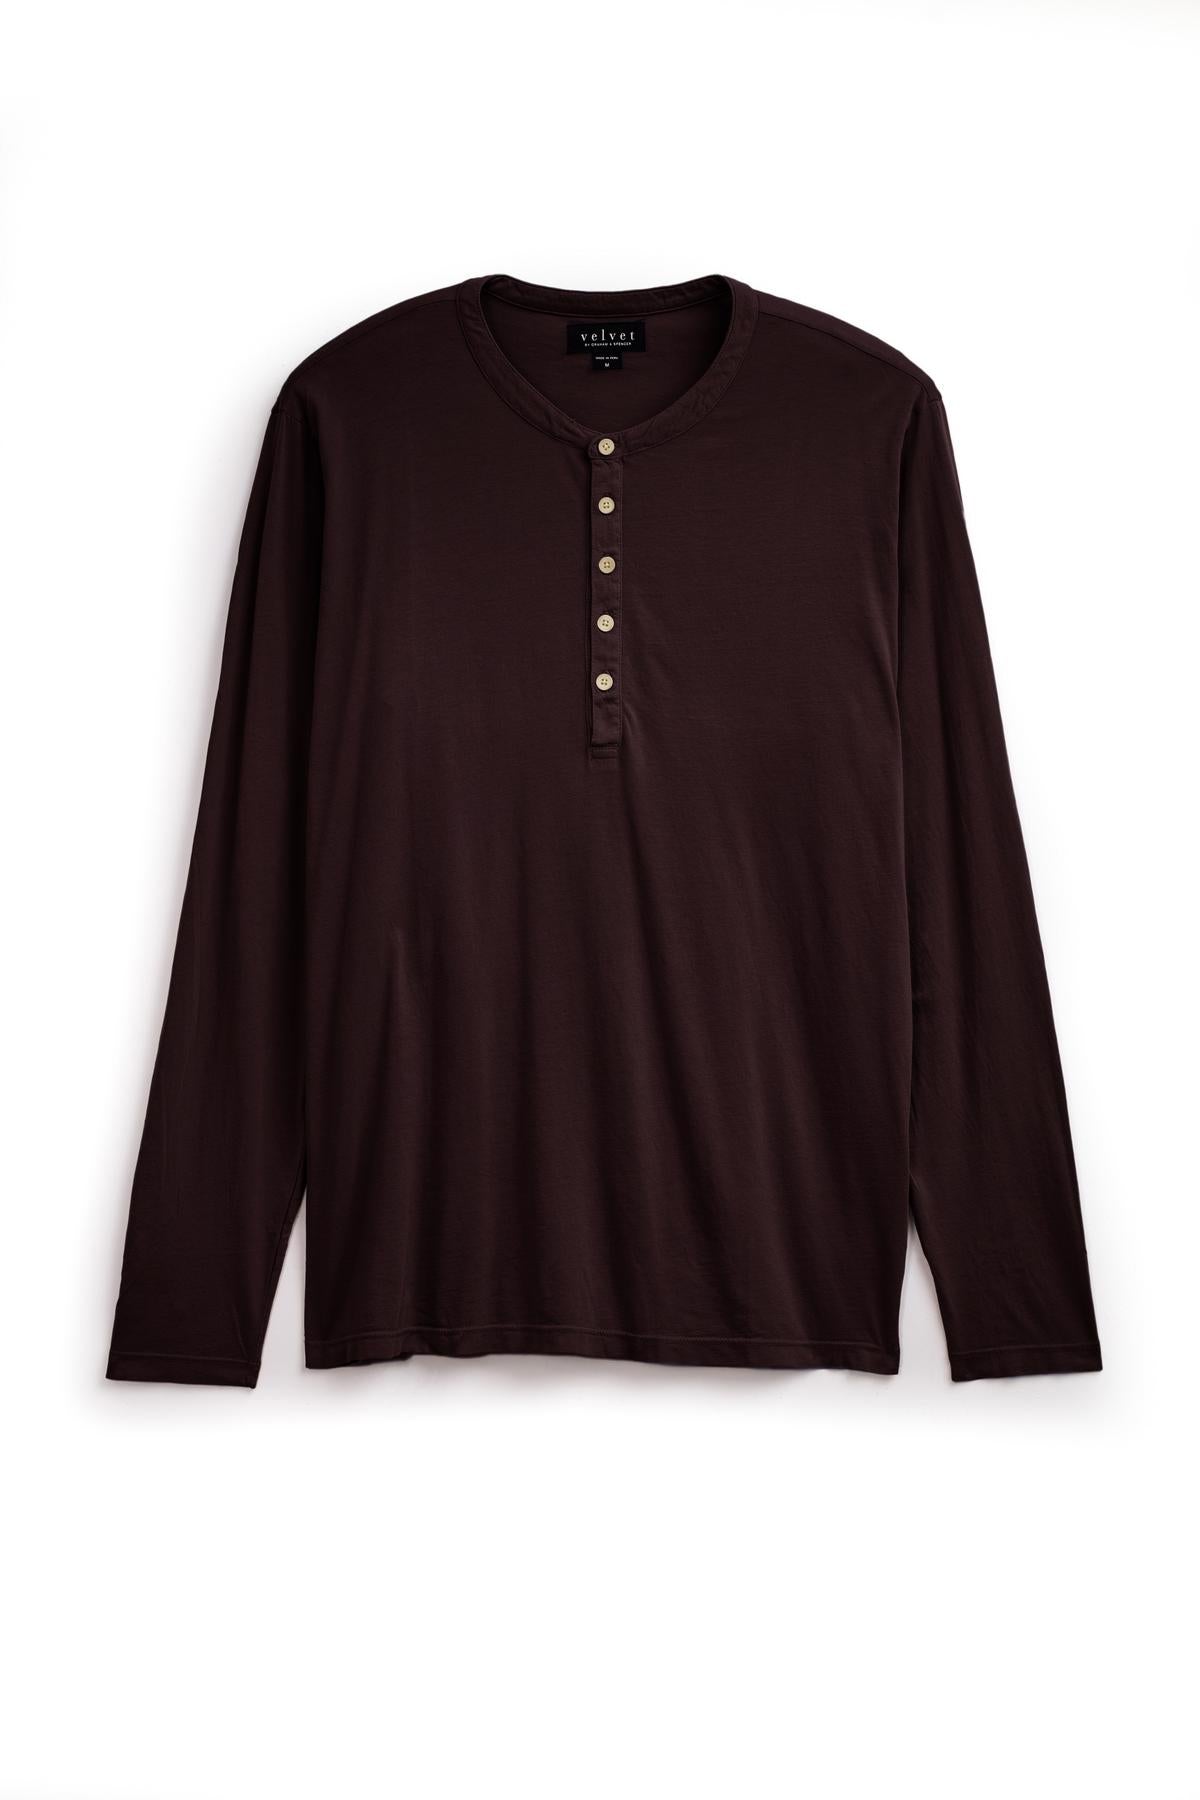   A lightweight ALVARO COTTON JERSEY HENLEY t-shirt with buttons, featuring a vintage-look, by Velvet by Graham & Spencer. 